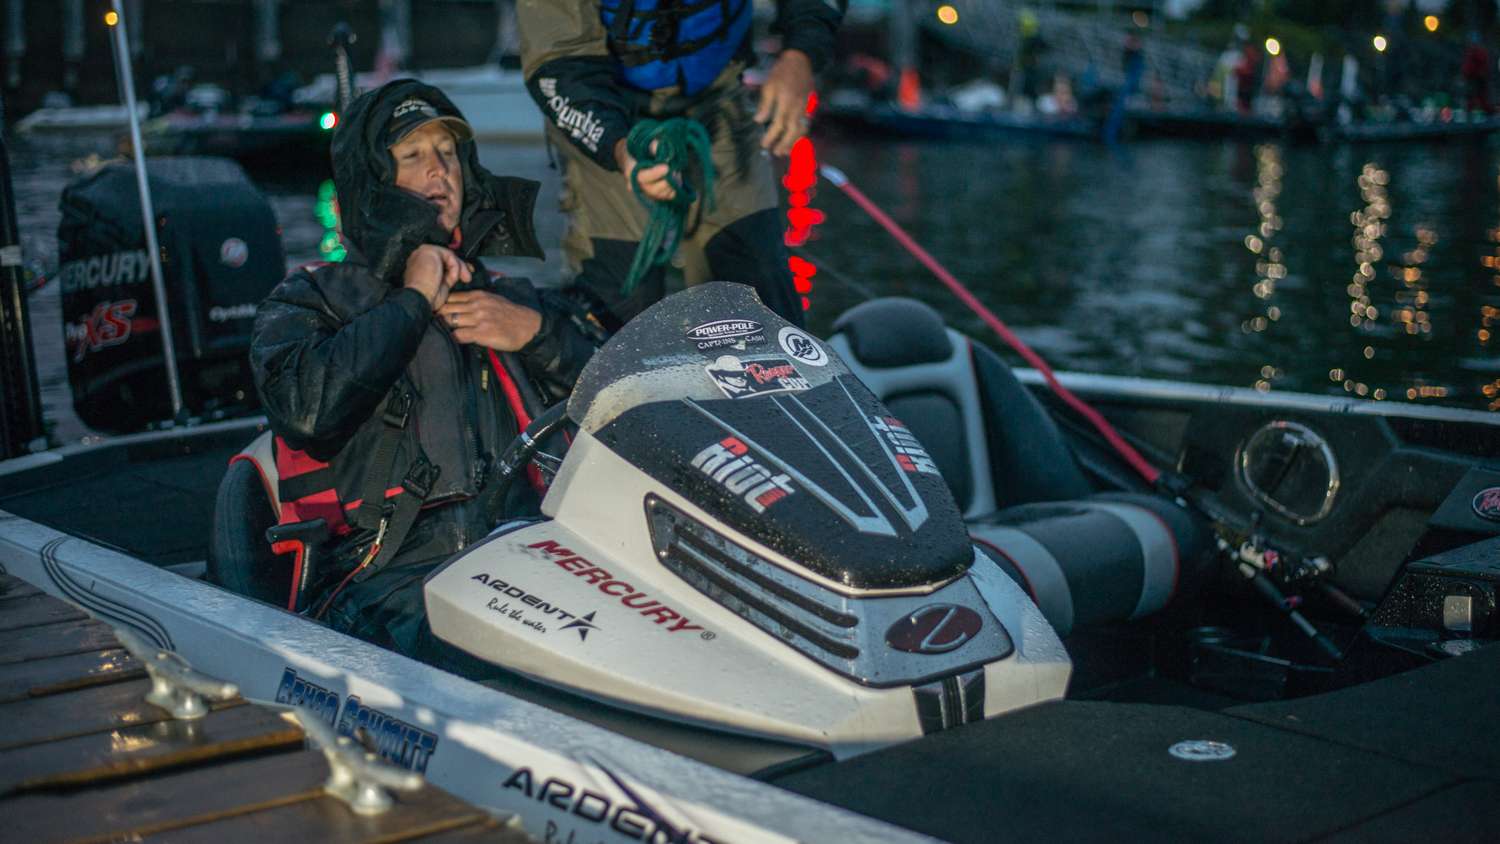 Brian Schmitt leads the tournament with 40-15. He is the first boat to leave the dock. His game plan is returning to a productive area about 10 miles north of the launch site. 
